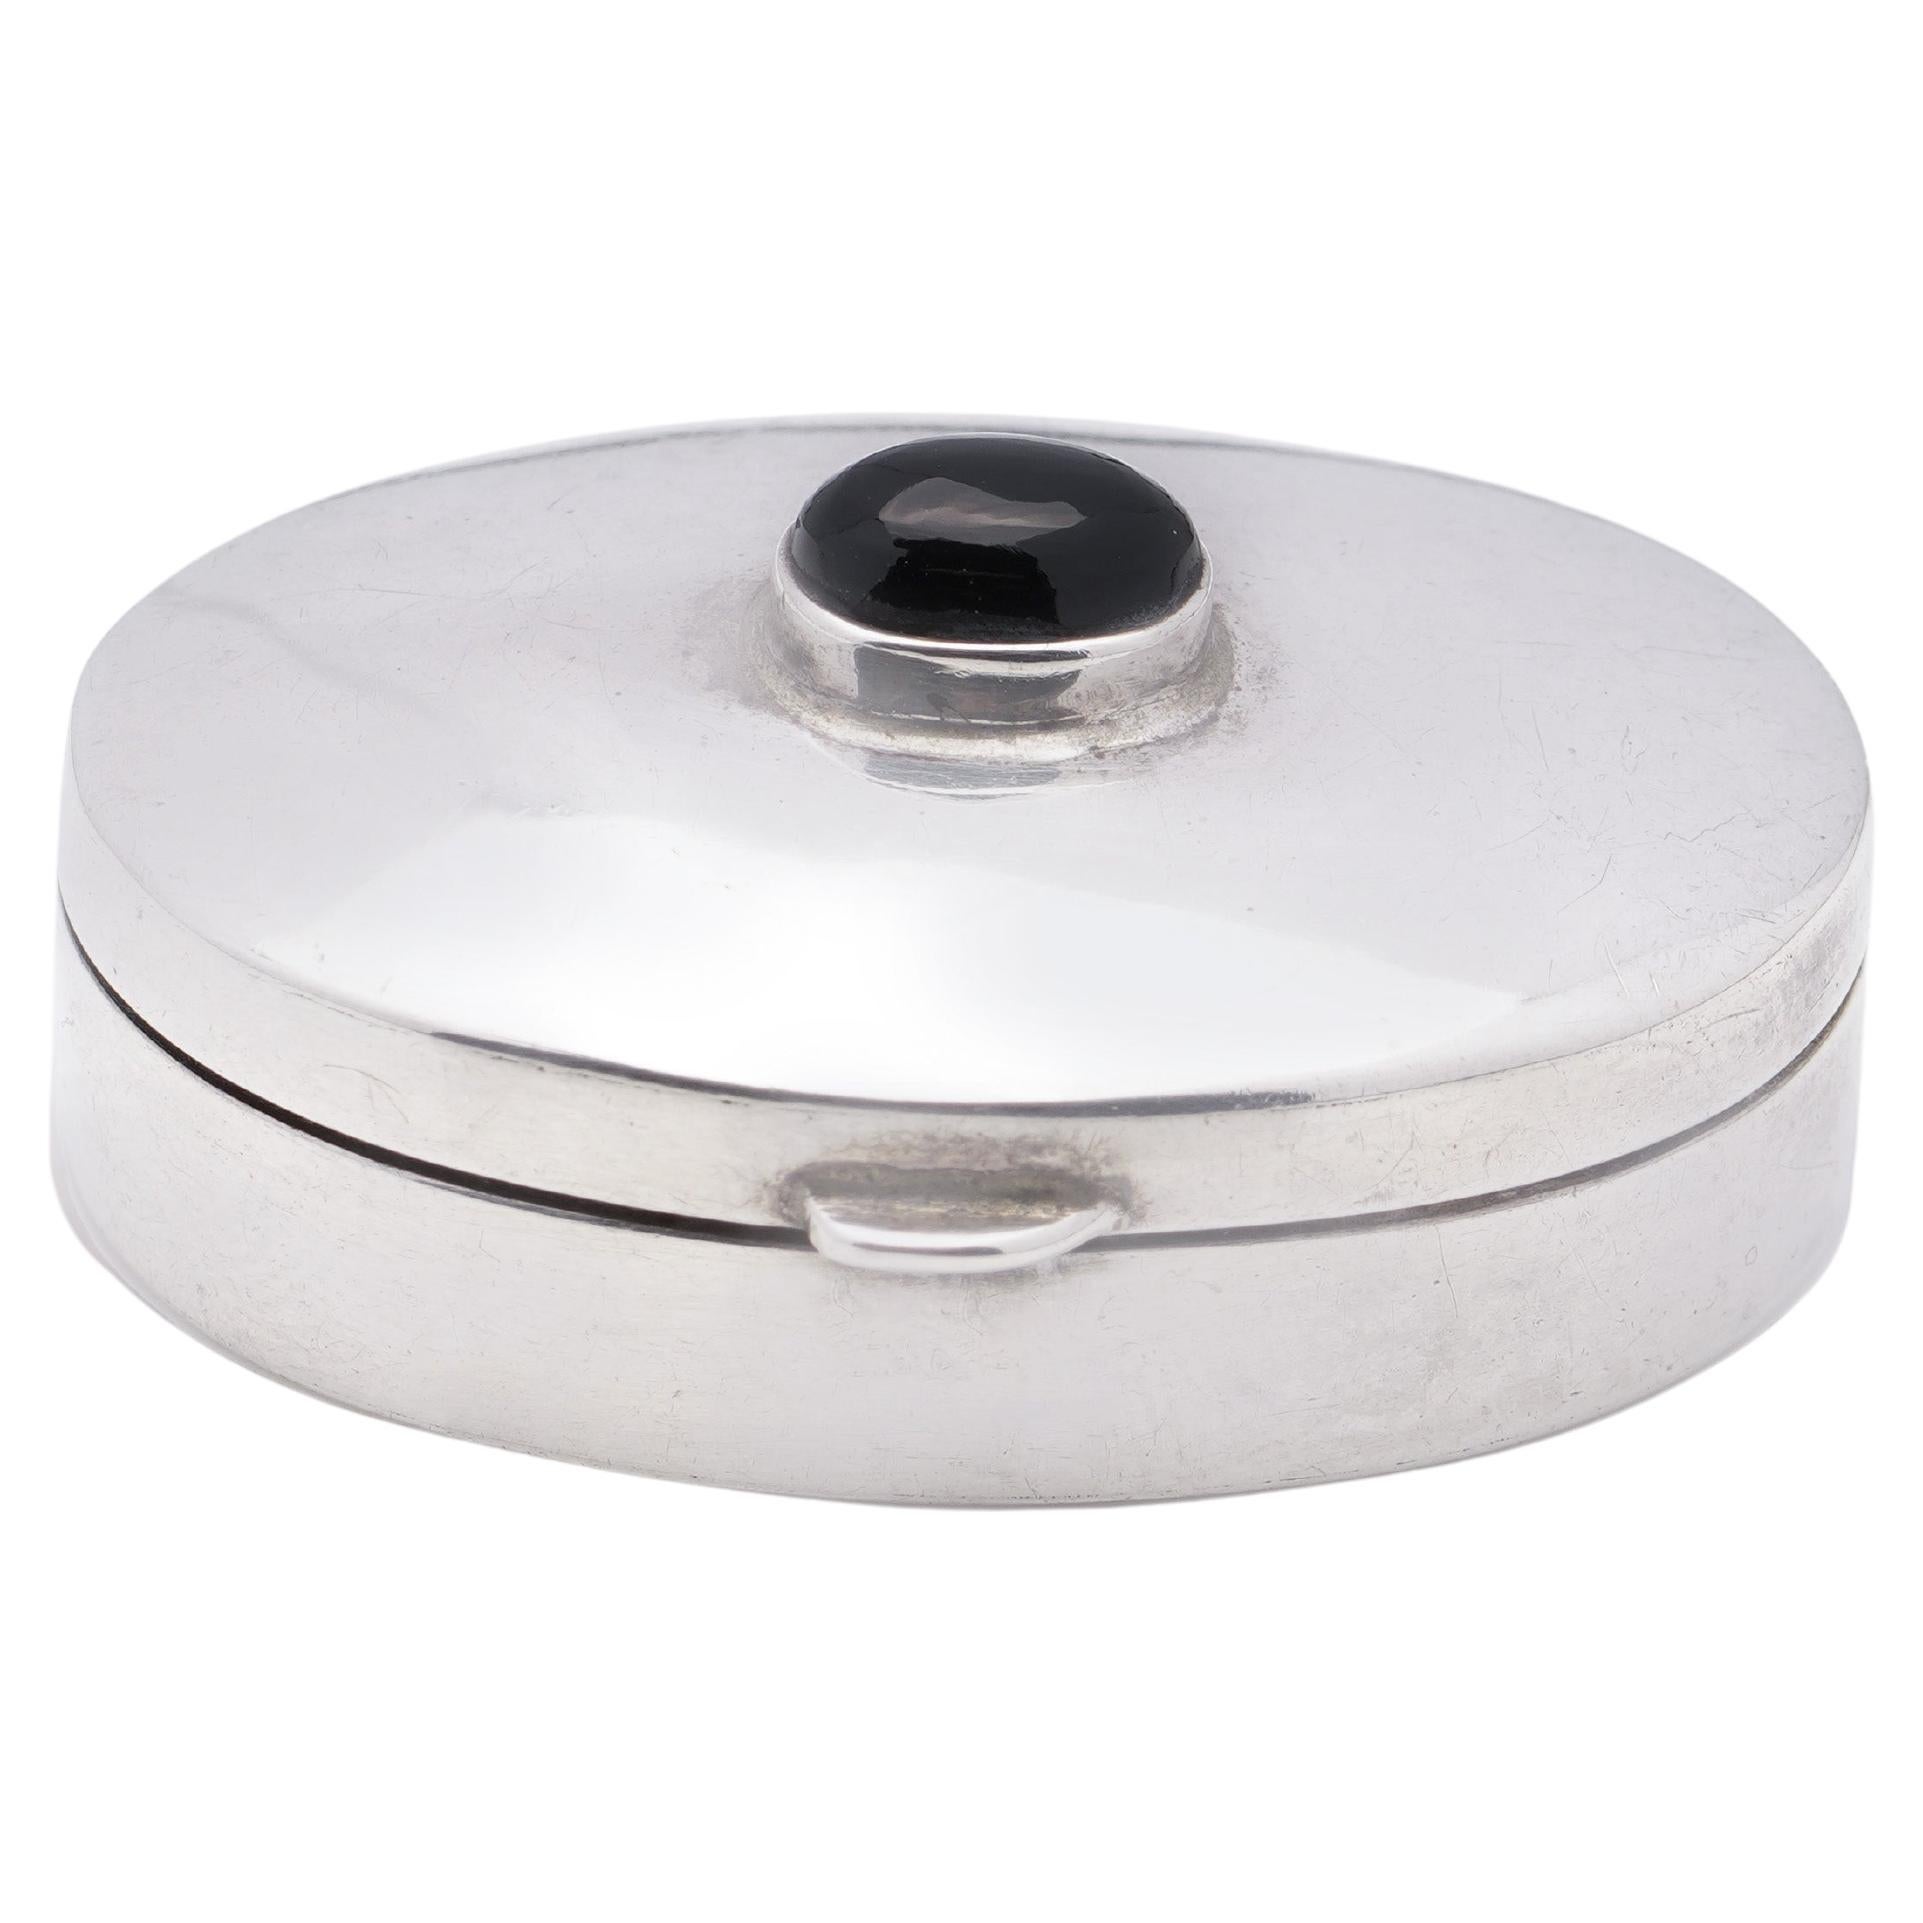 Late 20th-Century Oval-Shaped 925 silver Pillbox by Ari D Norman 